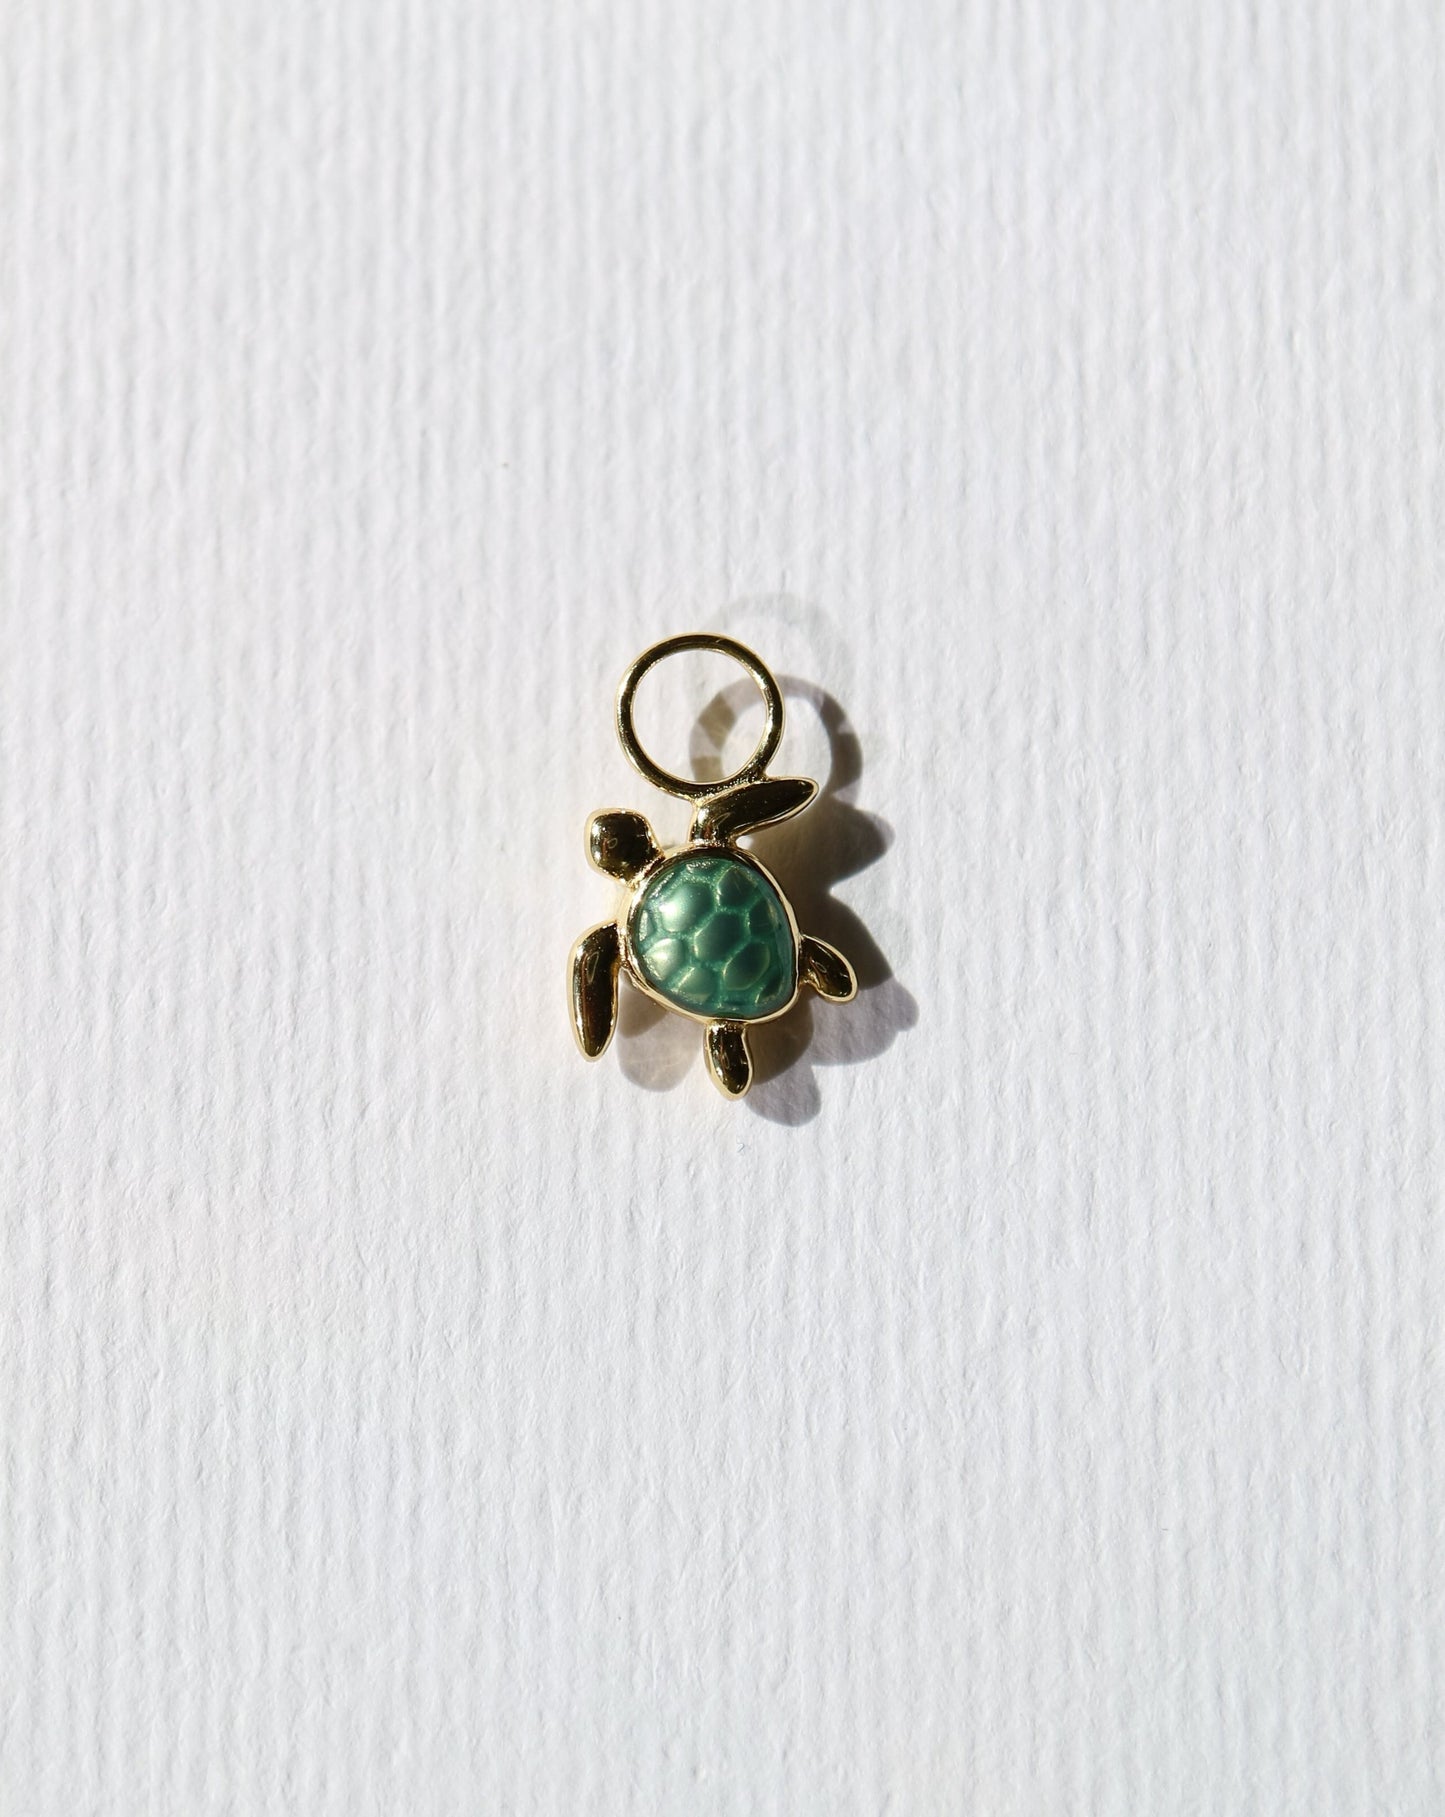 Turtle charm for jewellery